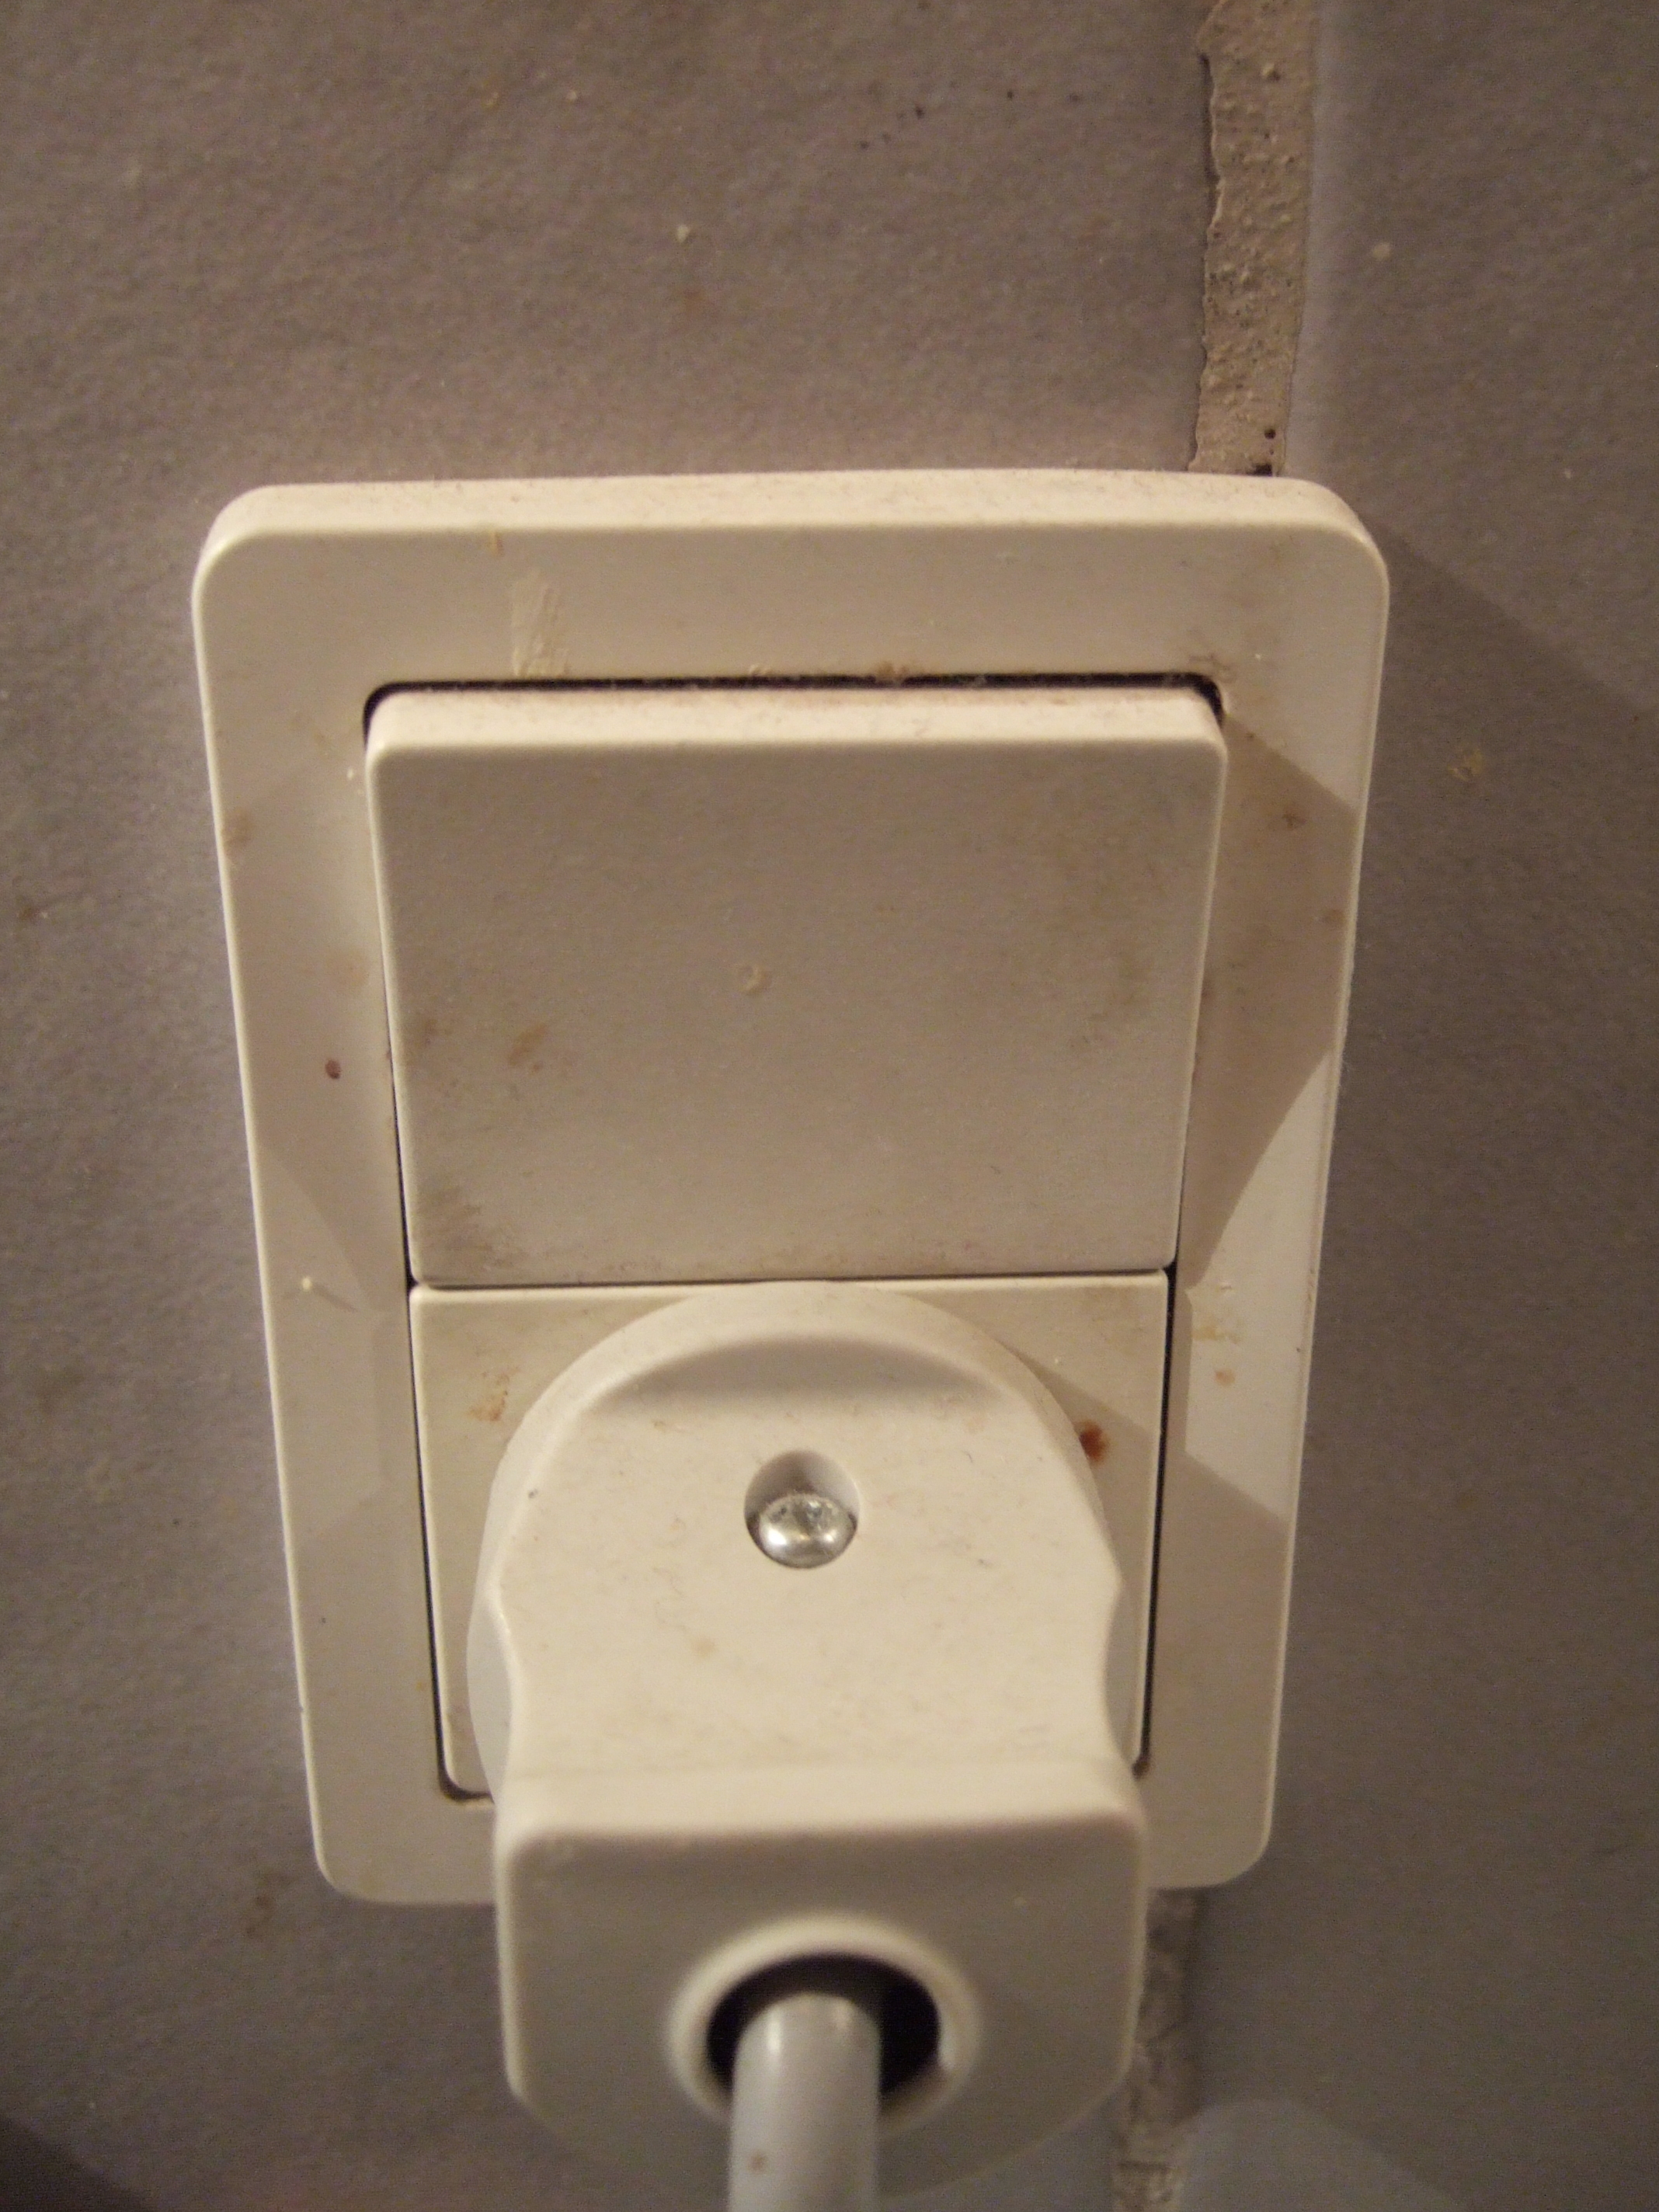 tabus lightswitch socket objects household plastic electricity power